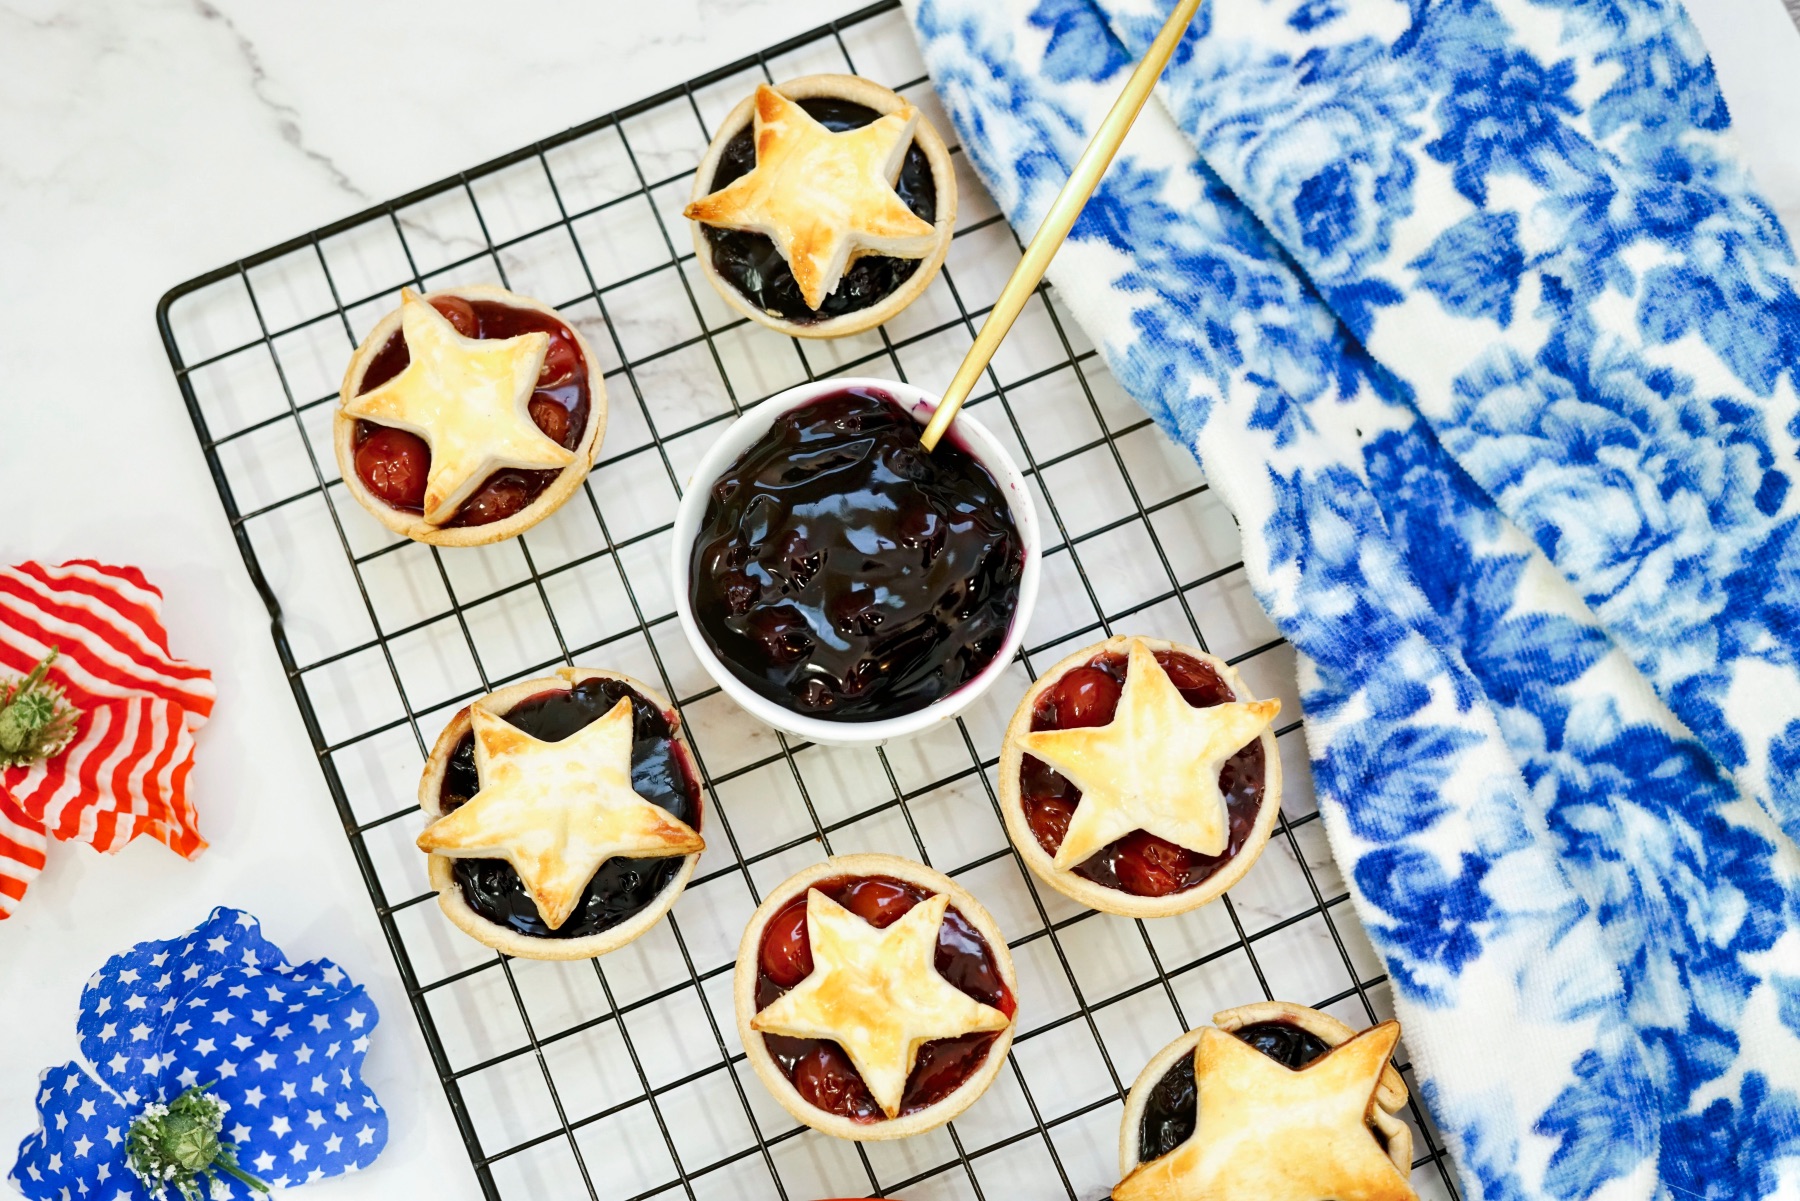 how to make american flag pies in cherry and blueberry